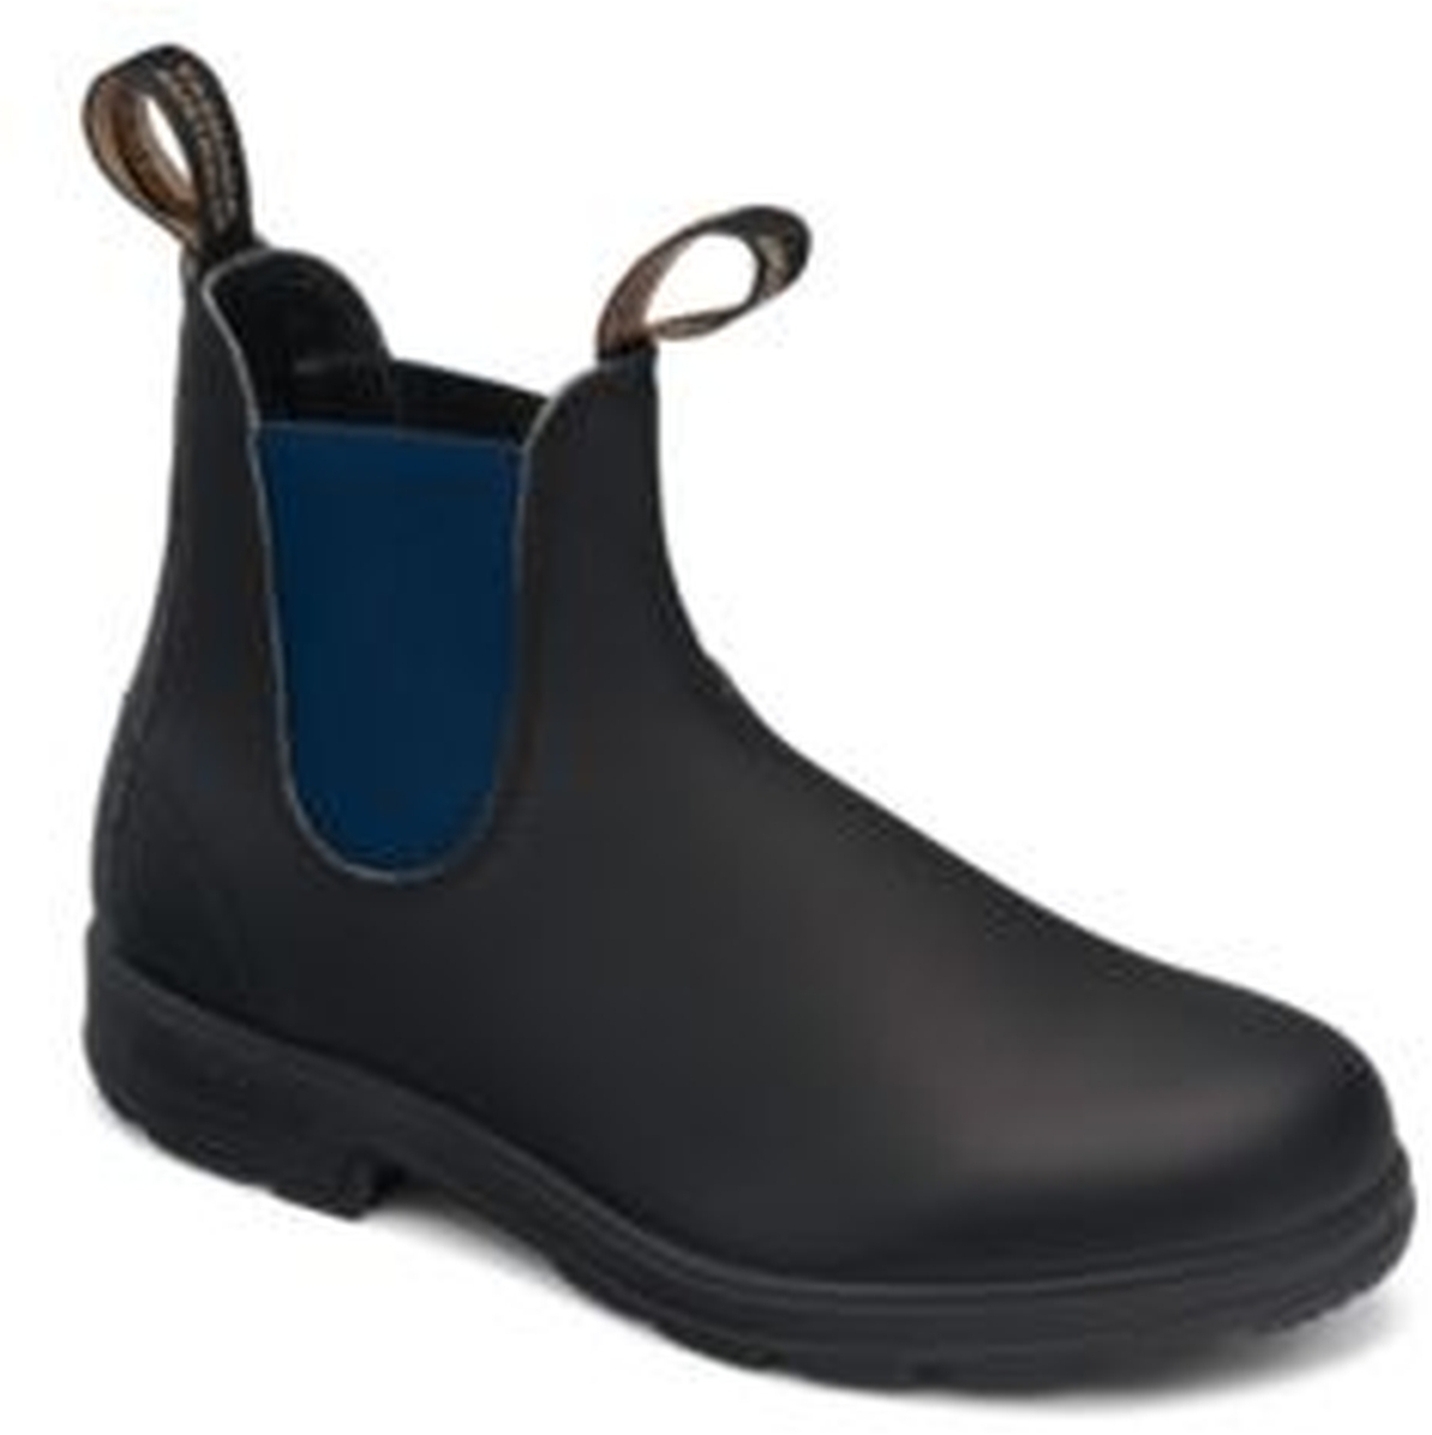 Blundstone 1917 Voltan Black Leather with Blue Elastic  (550 Series) Calf leather